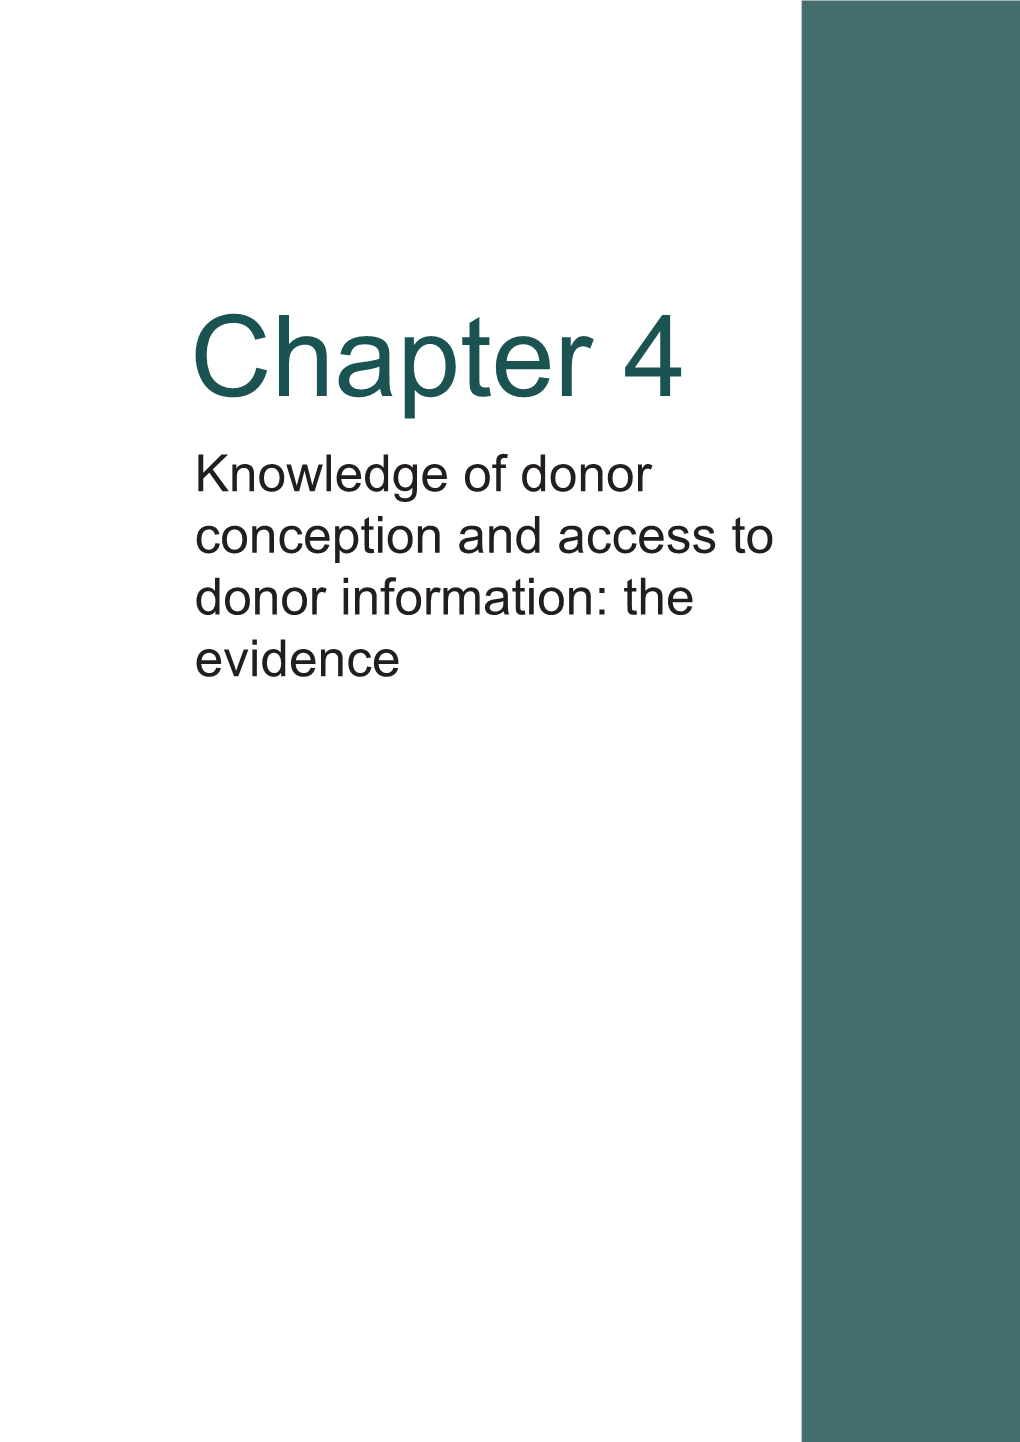 Chapter 4 Knowledge of Donor Conception and Access to Donor Information: the Evidence